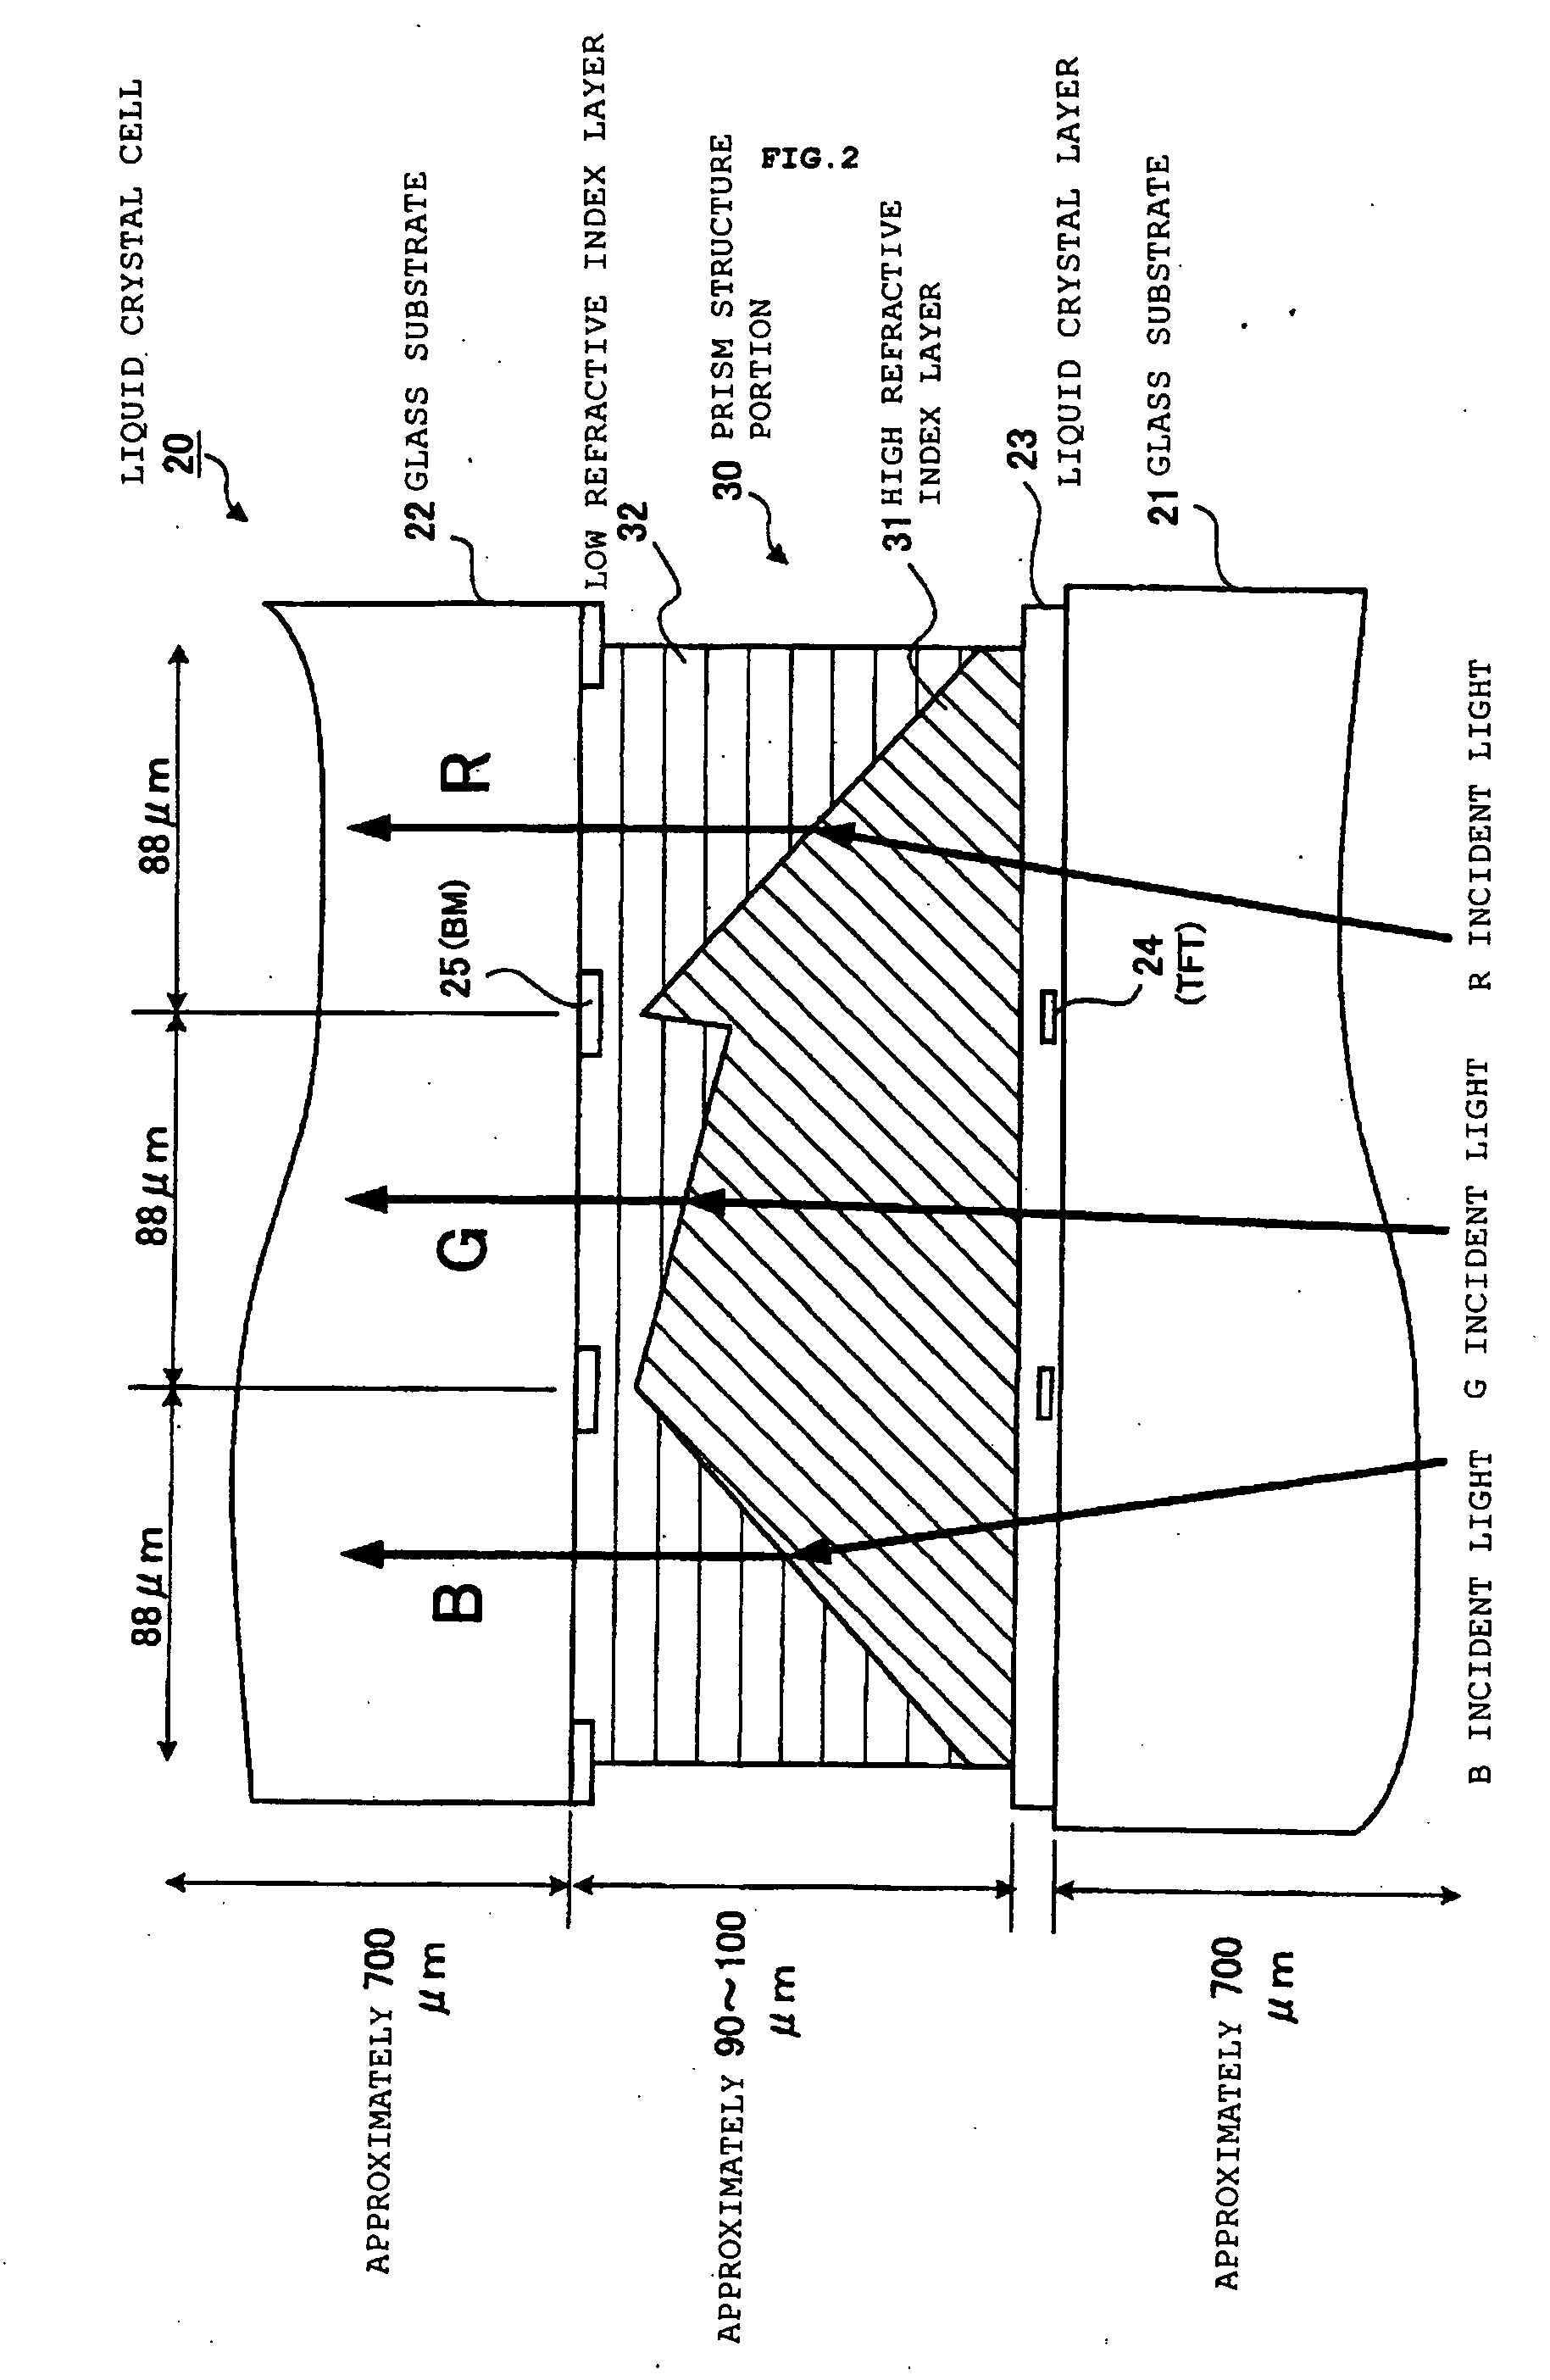 Color filterless display device, optical element, and manufacture